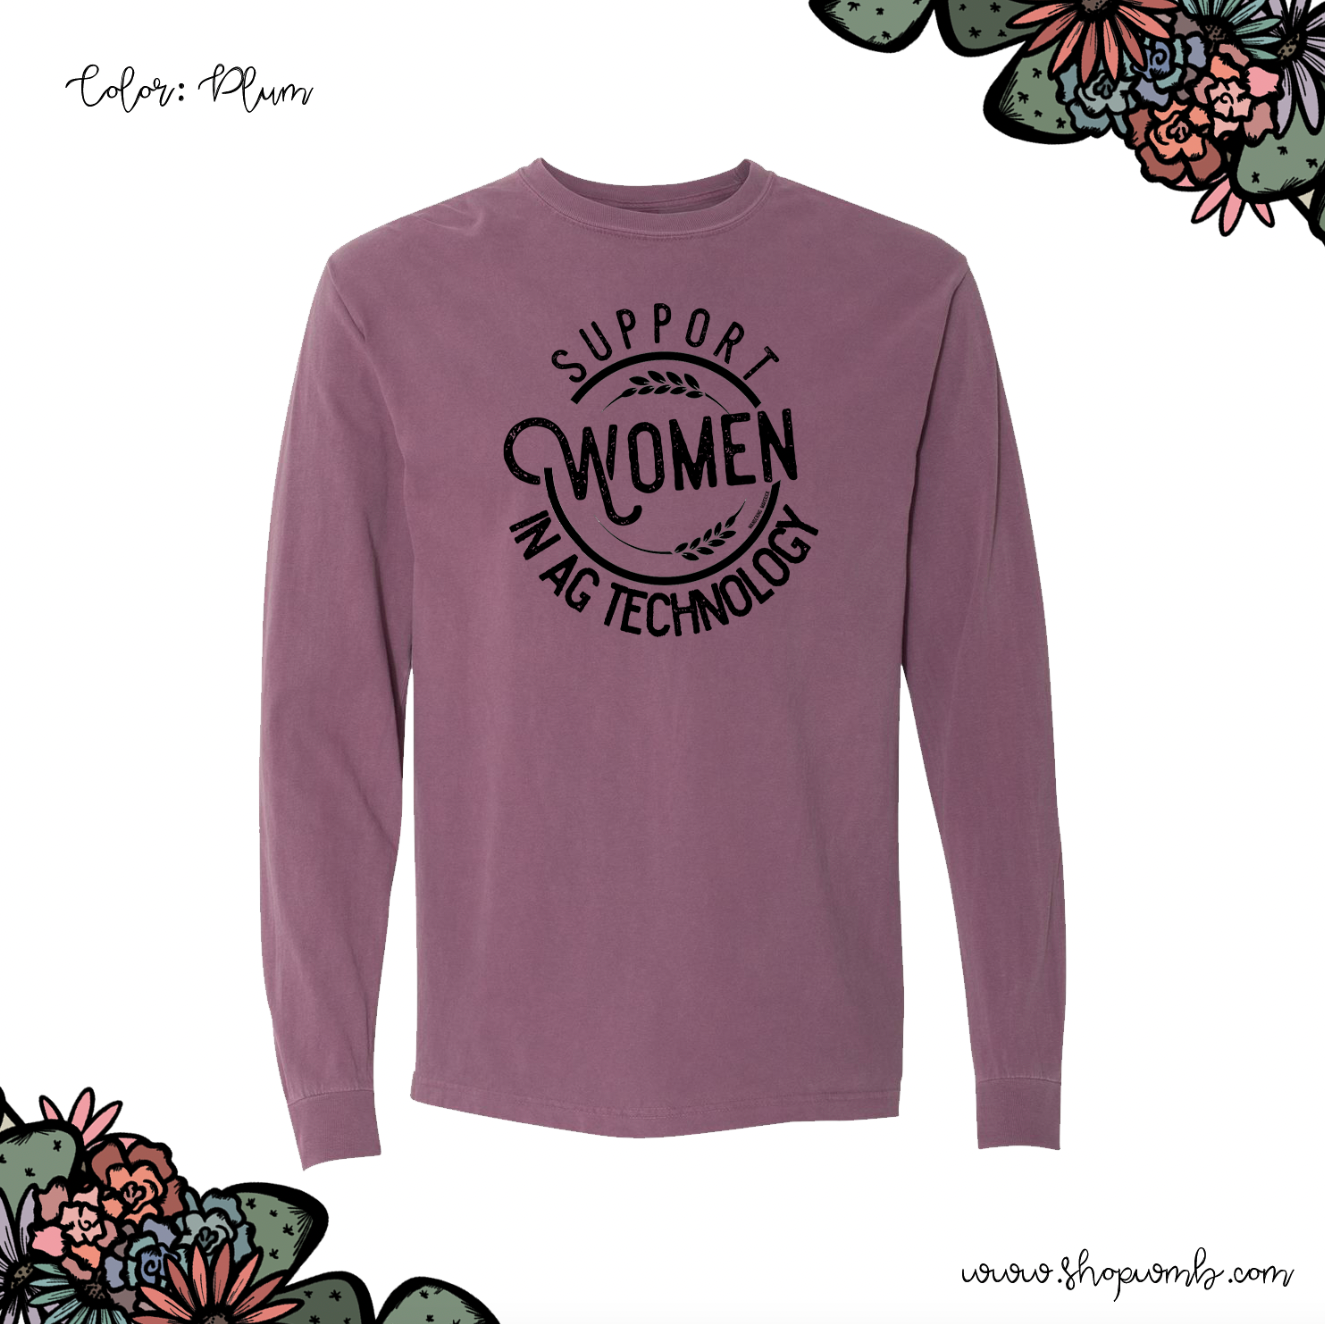 Support Women In Ag Technology LONG SLEEVE T-Shirt (S-3XL) - Multiple Colors!